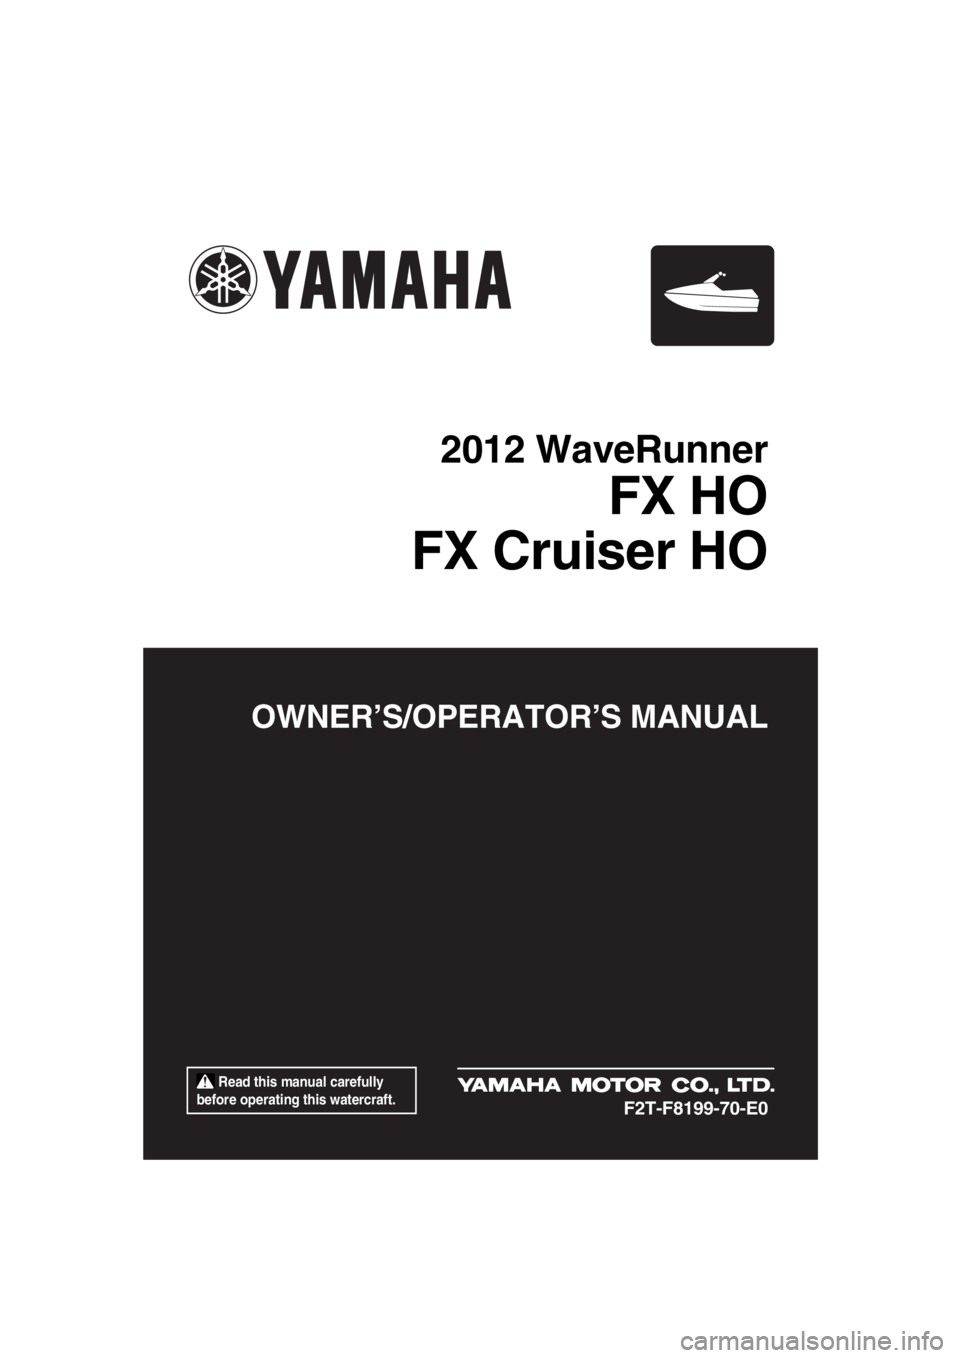 YAMAHA FX HO CRUISER 2012  Owners Manual  Read this manual carefully 
before operating this watercraft.
OWNER’S/OPERATOR’S MANUAL
2012 WaveRunner
FX HO
FX Cruiser HO
F2T-F8199-70-E0
UF2T70E0.book  Page 1  Thursday, December 29, 2011  2:1